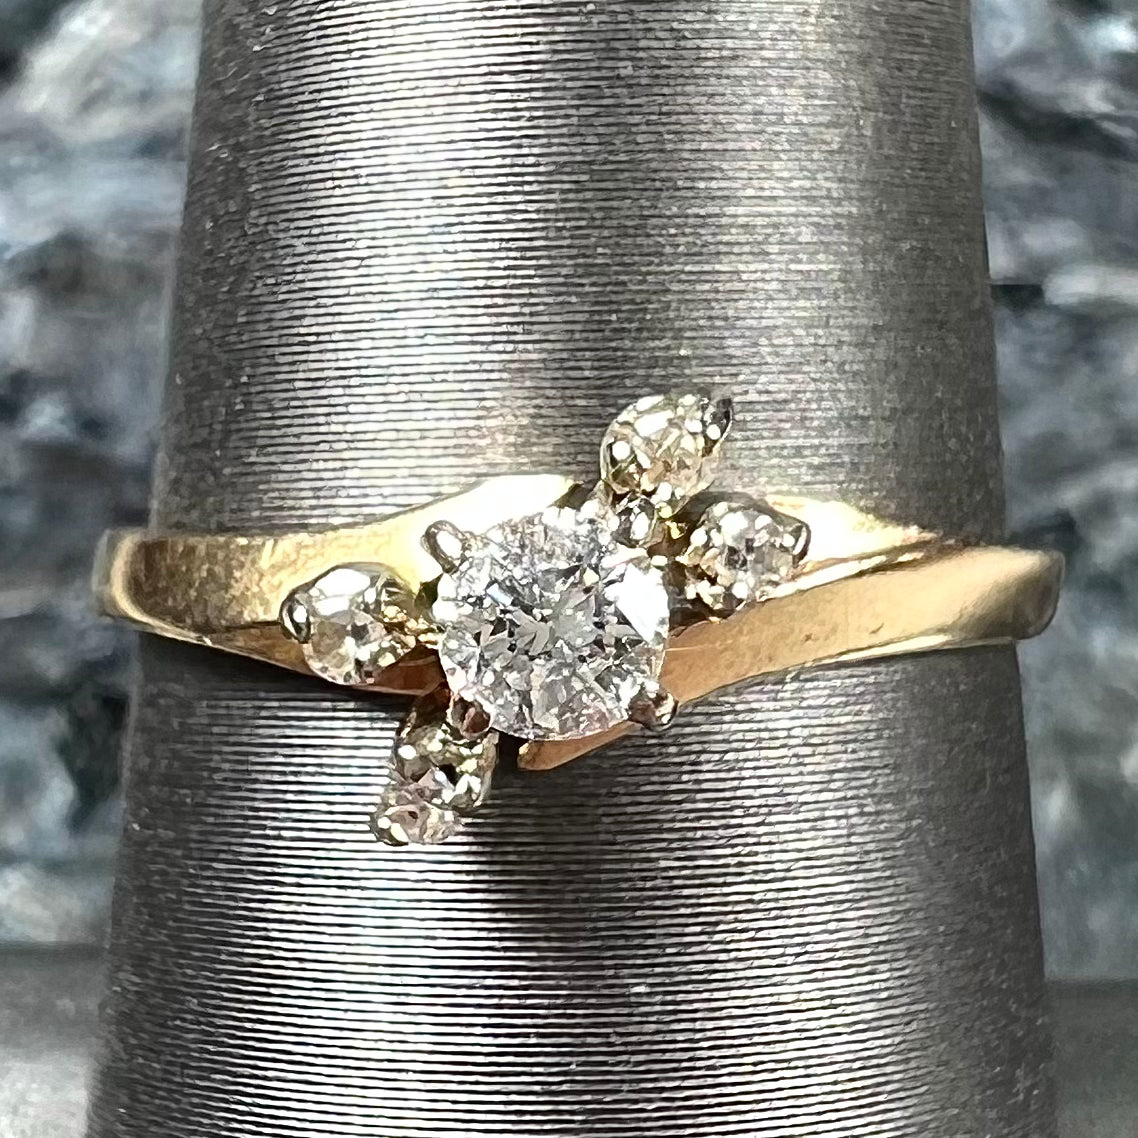 A yellow gold high-set diamond ring with four side diamonds.